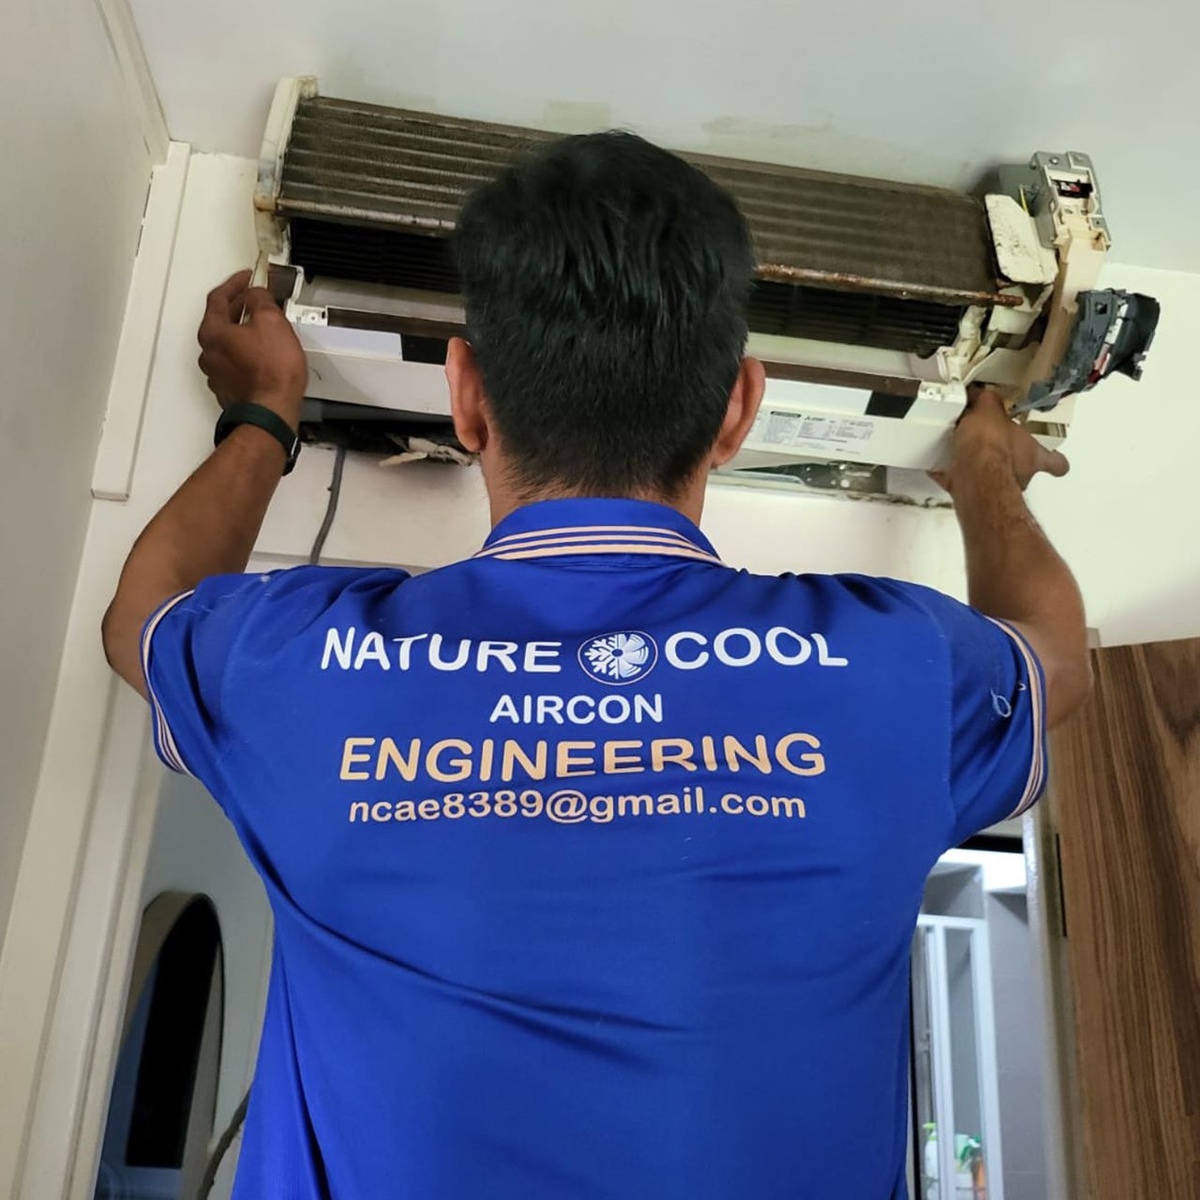 DIY AC Repair Tips You Can Try Before Calling a Professional